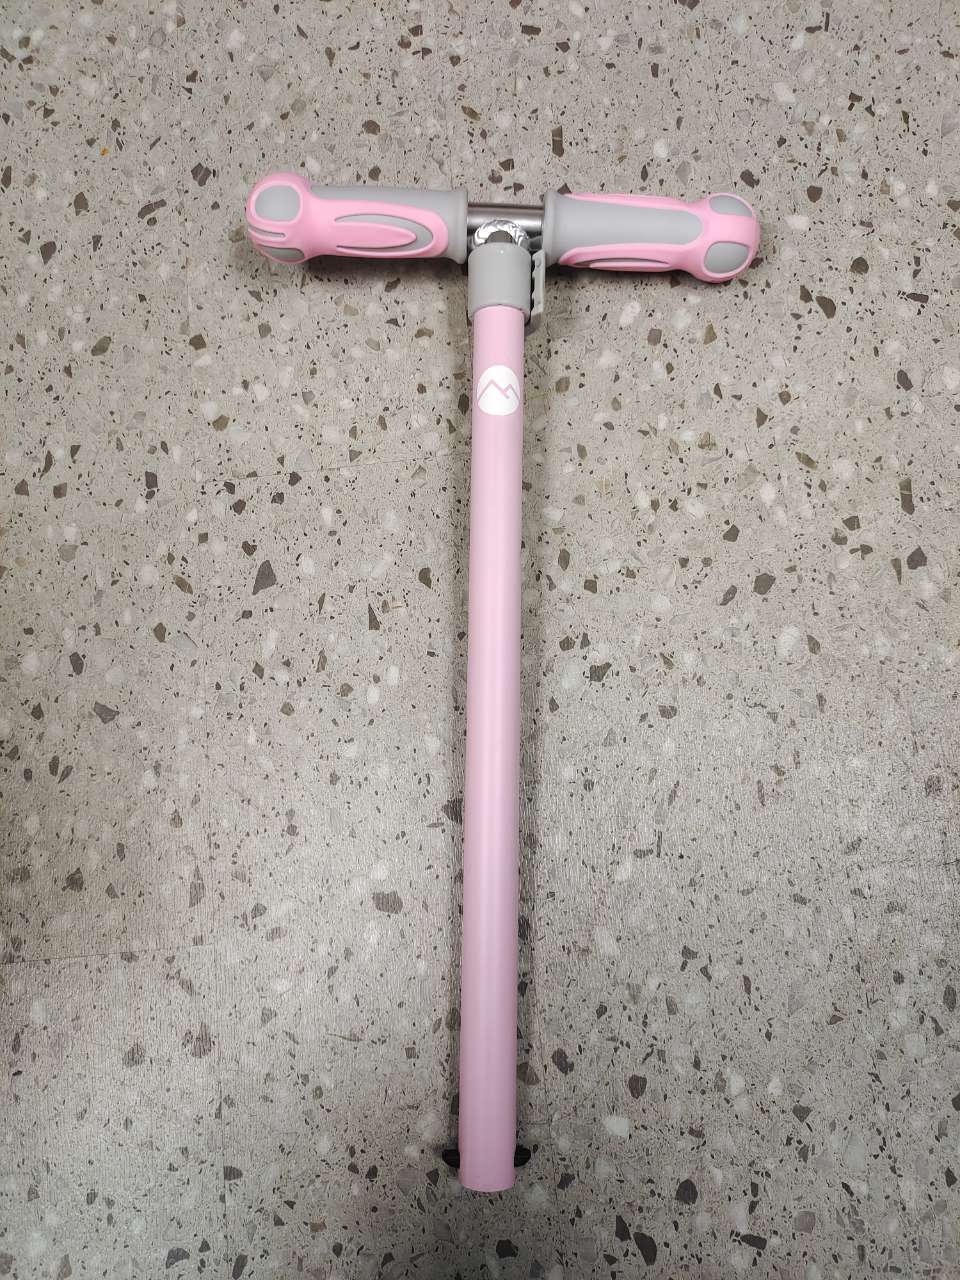 The Handle Portion of the Scooter